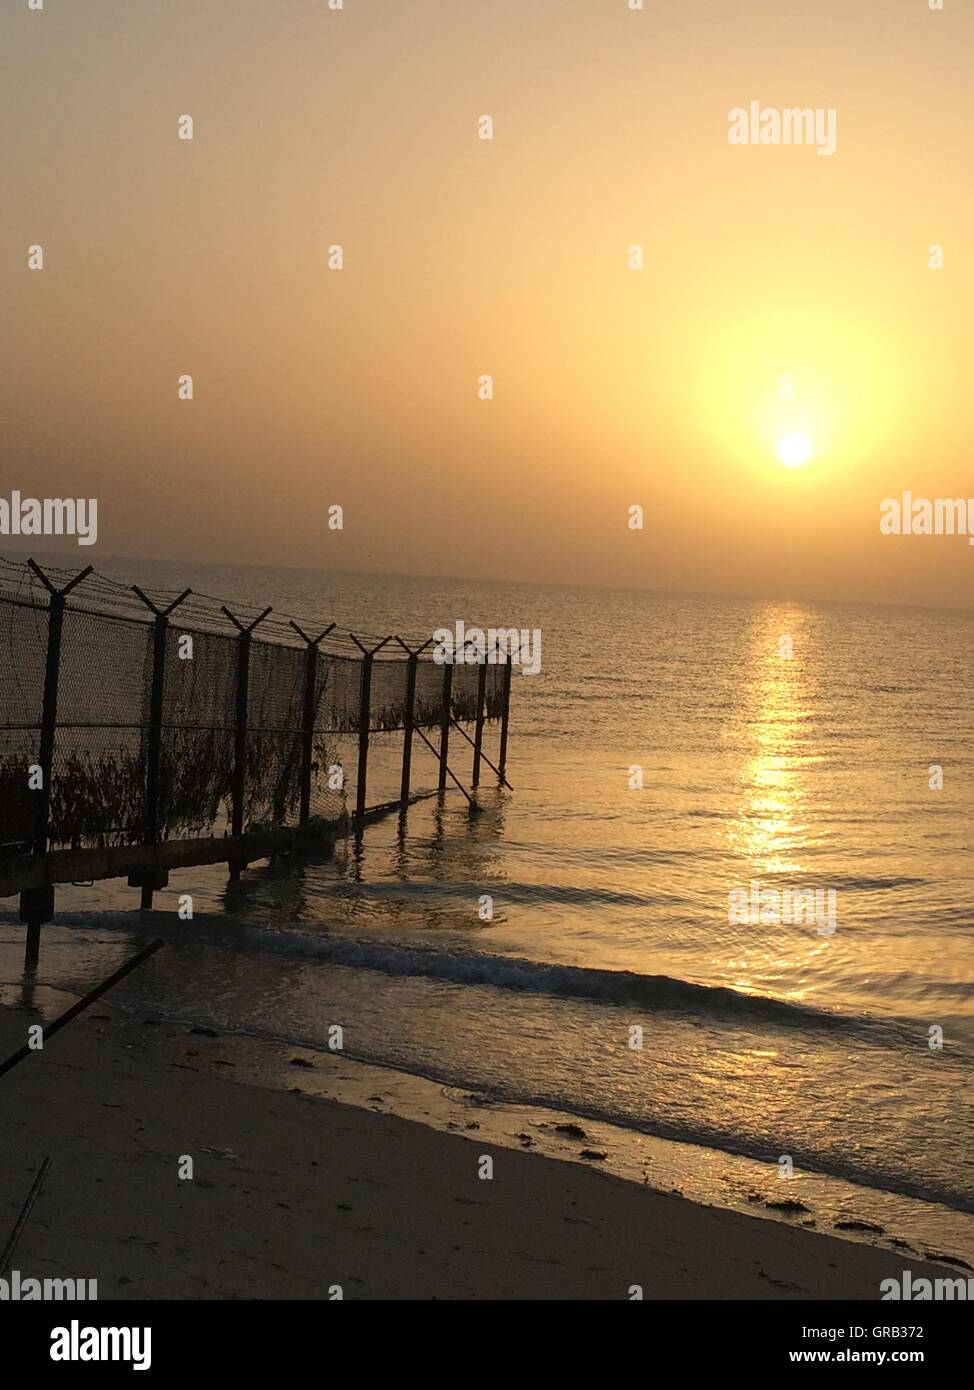 Mid-summer sunrise over the arabian gulf with fence Stock Photo